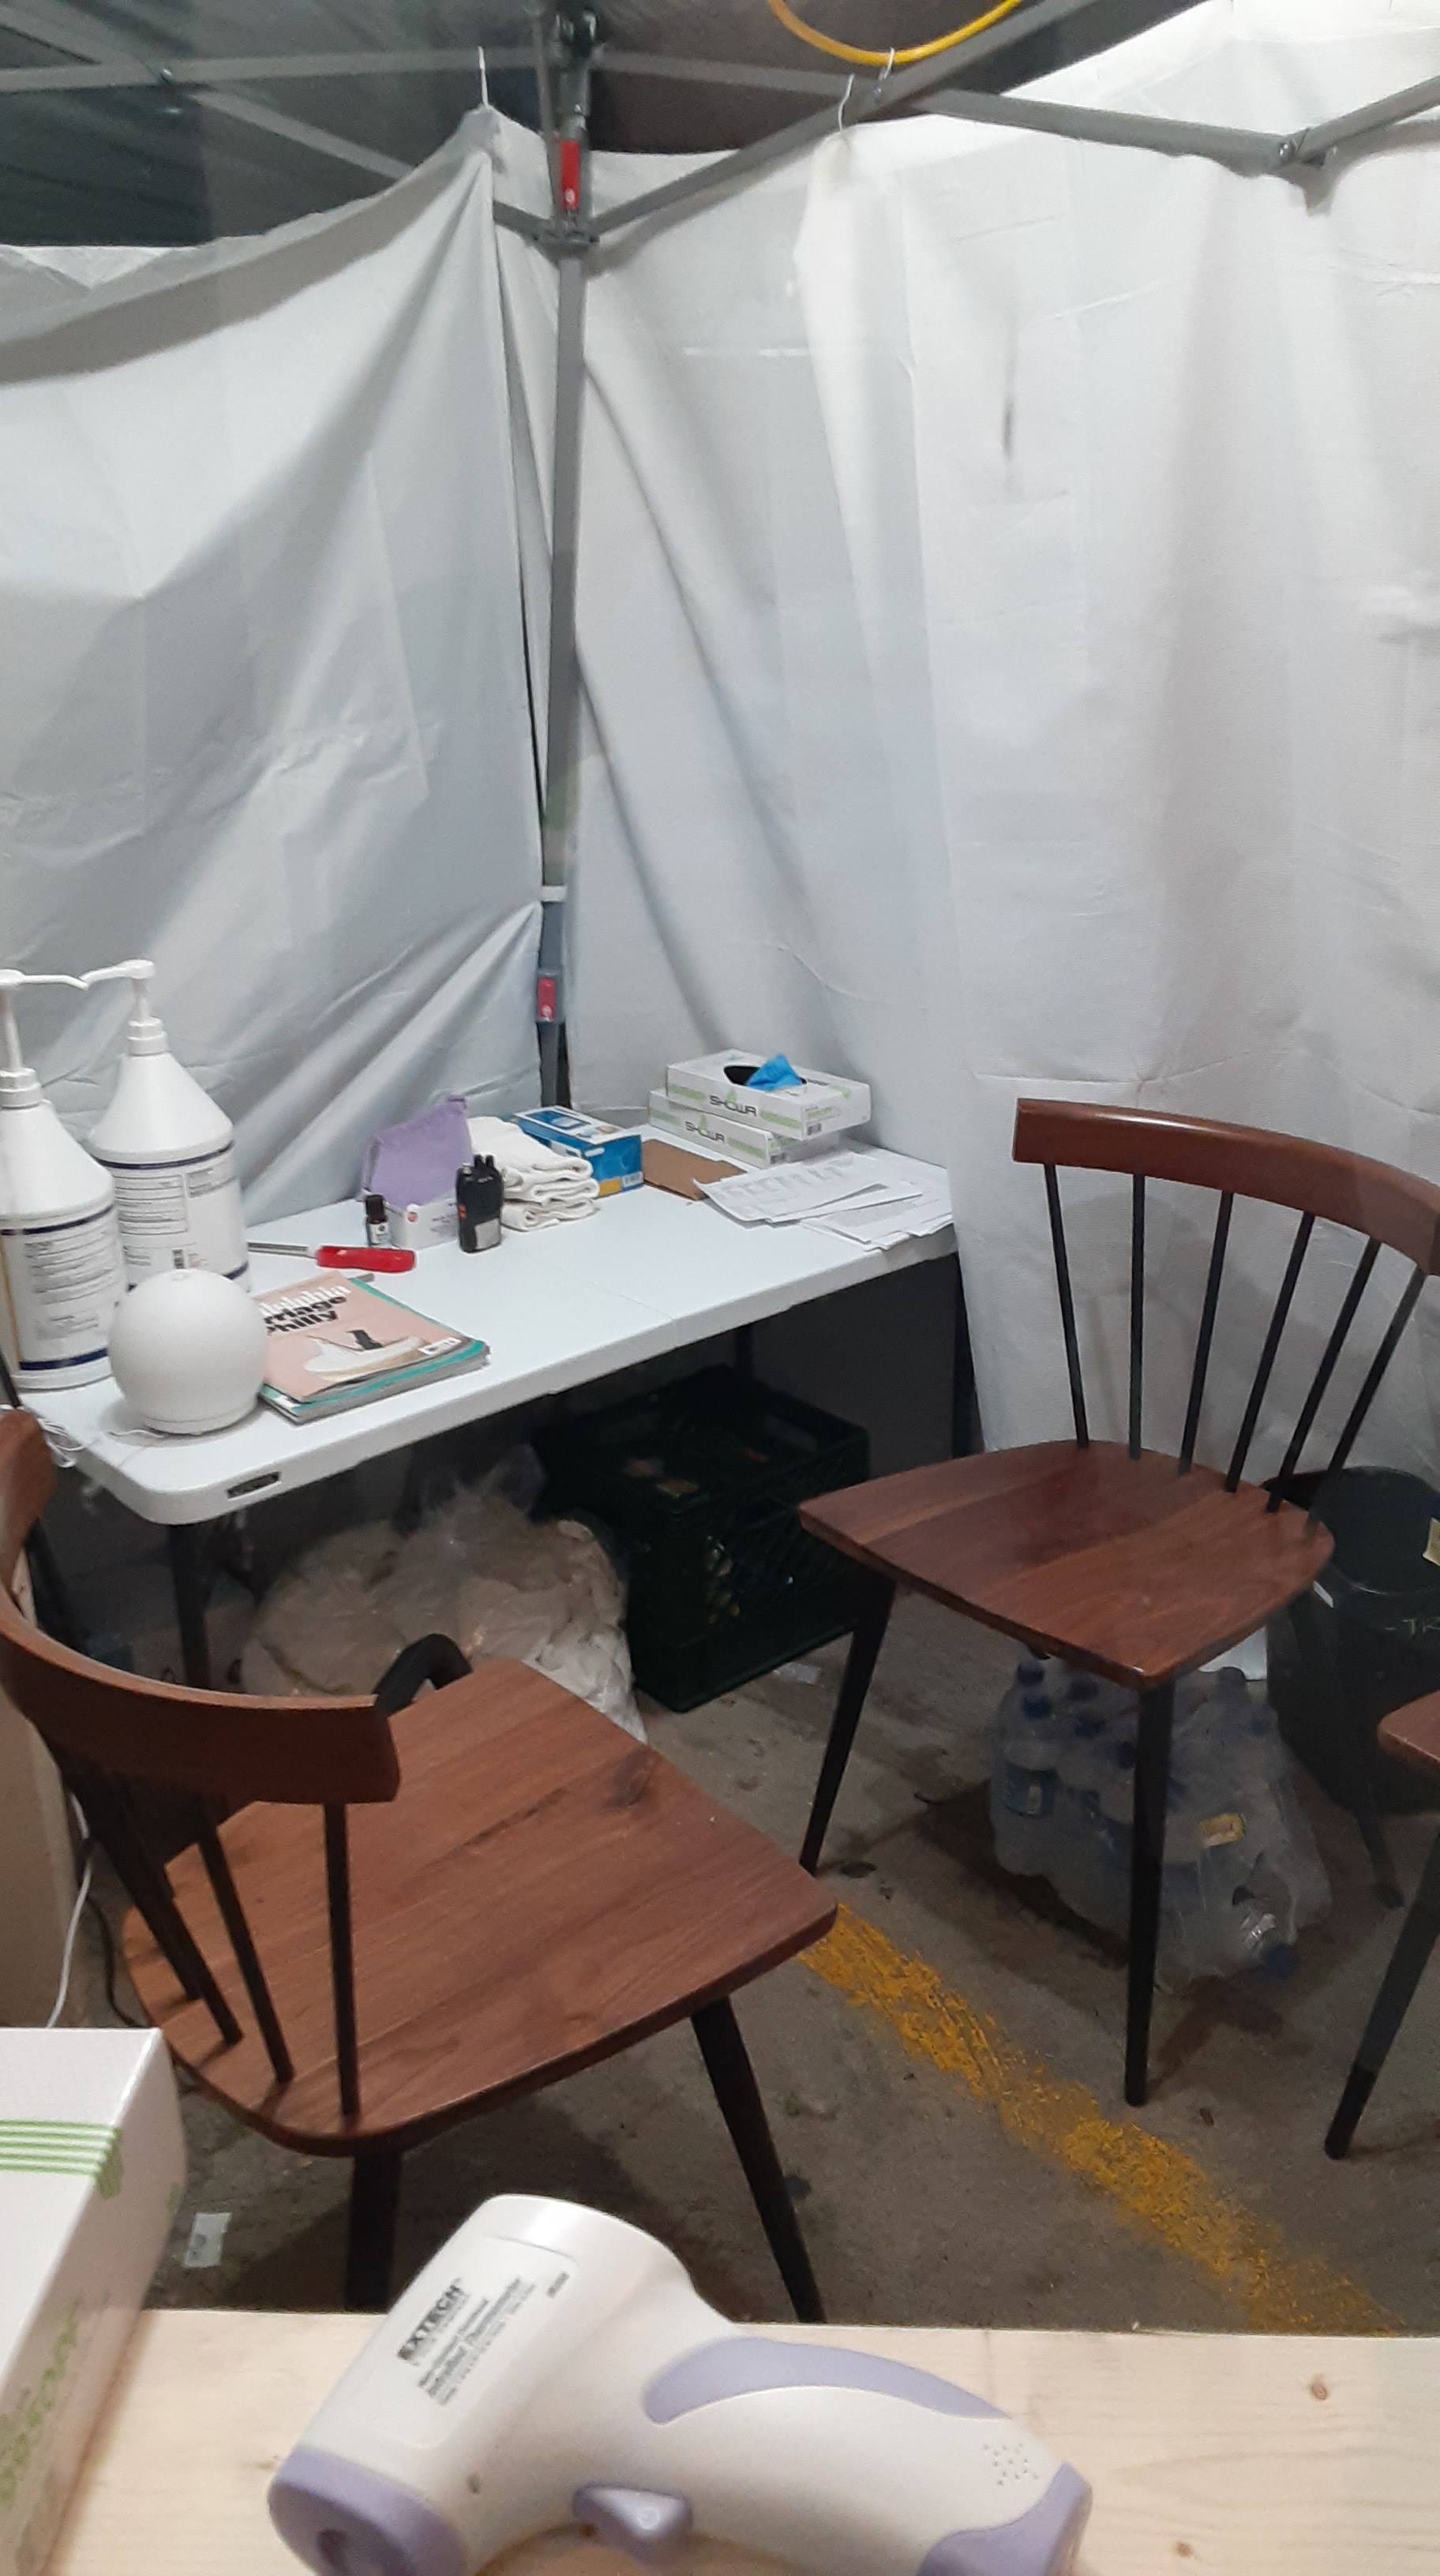 Inside Whole Foods medical tent during Covid-19 pandemic, where employee temperatures are checked (April-2020)